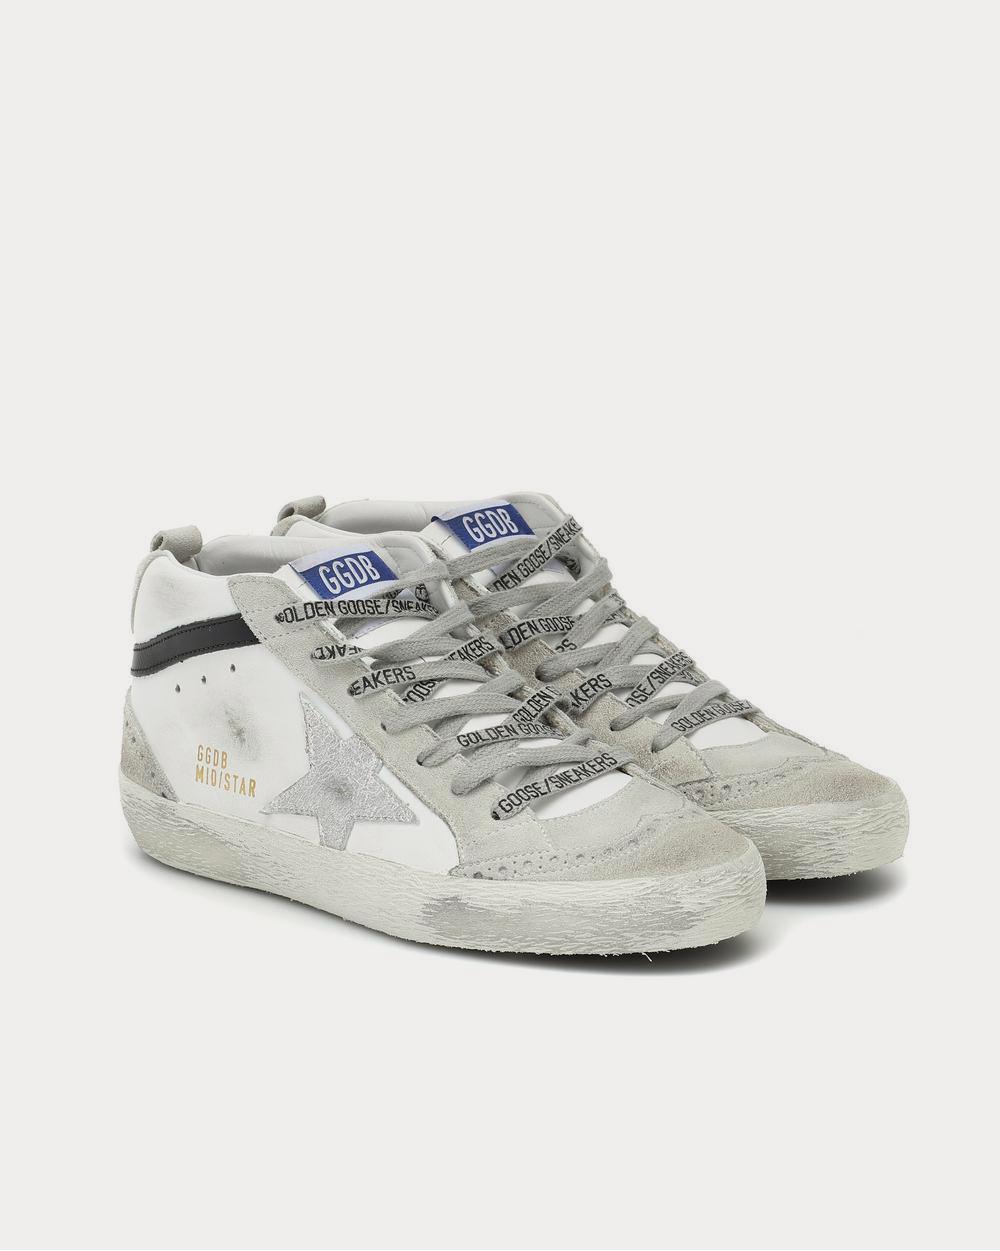 Golden Goose - Mid Star leather White High Top Sneakers